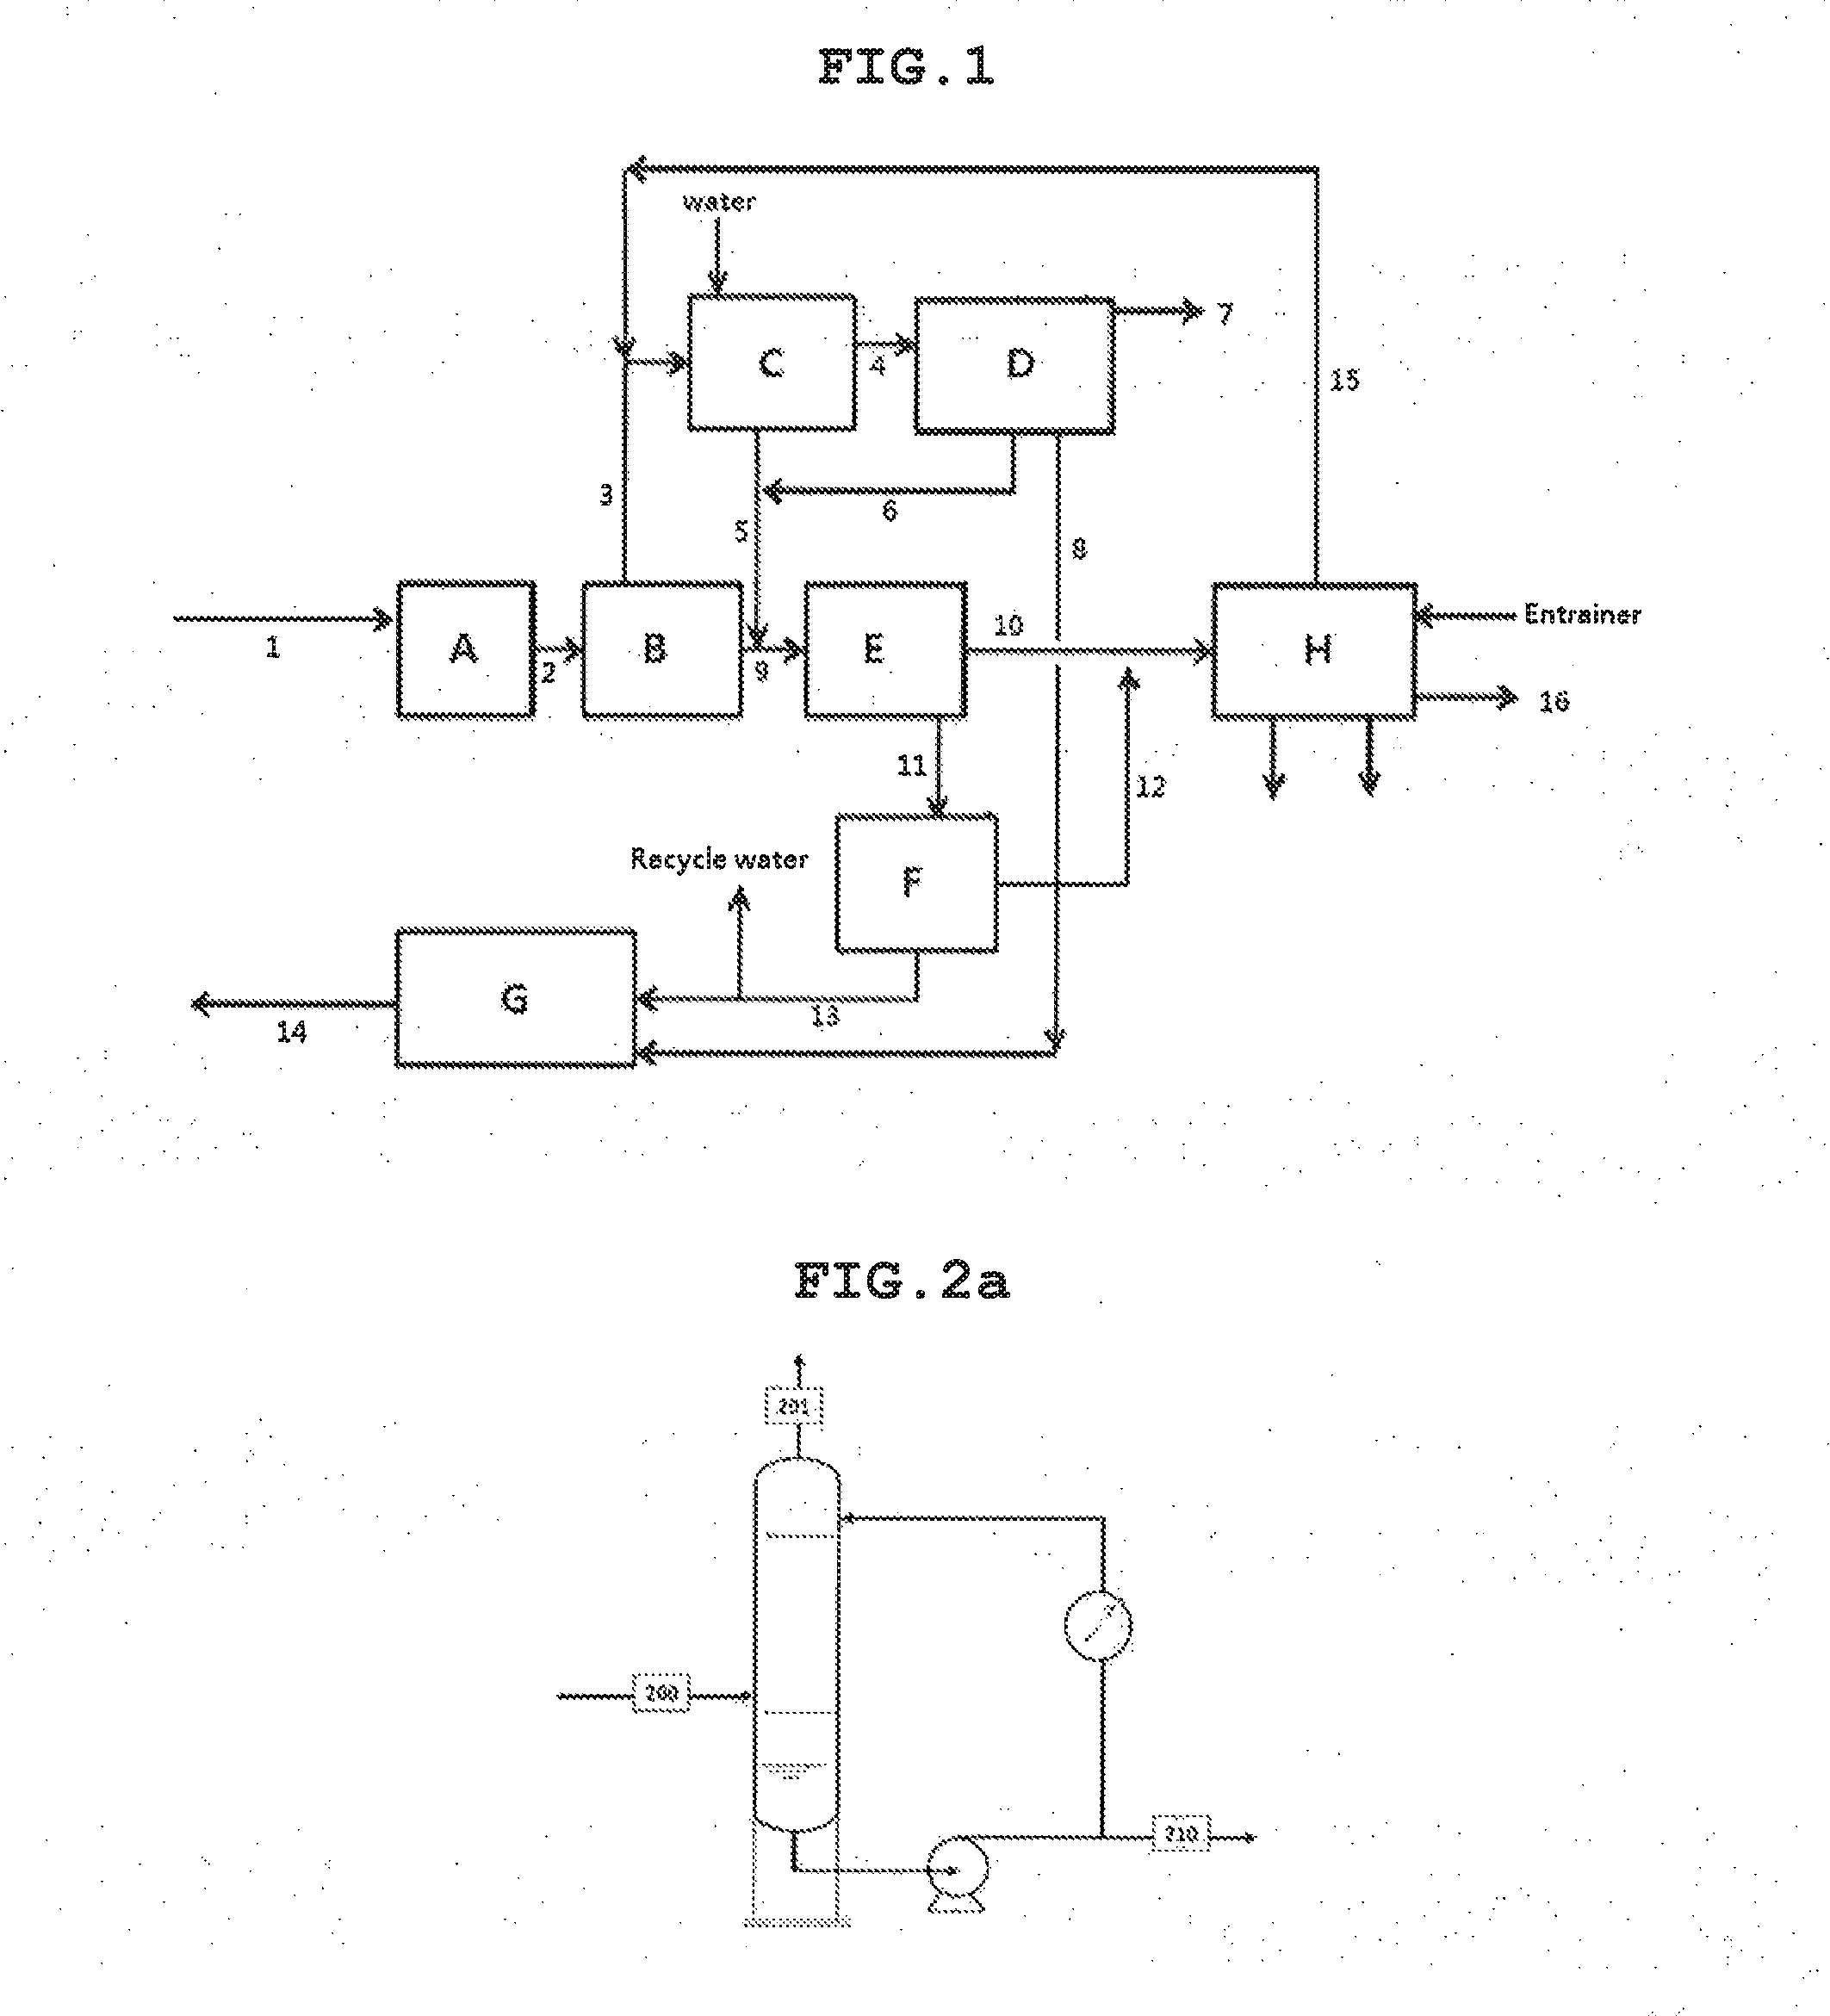 Method of recovering 1,3-butadiene and methylethylketone from dehydration products of 2,3-butanediol